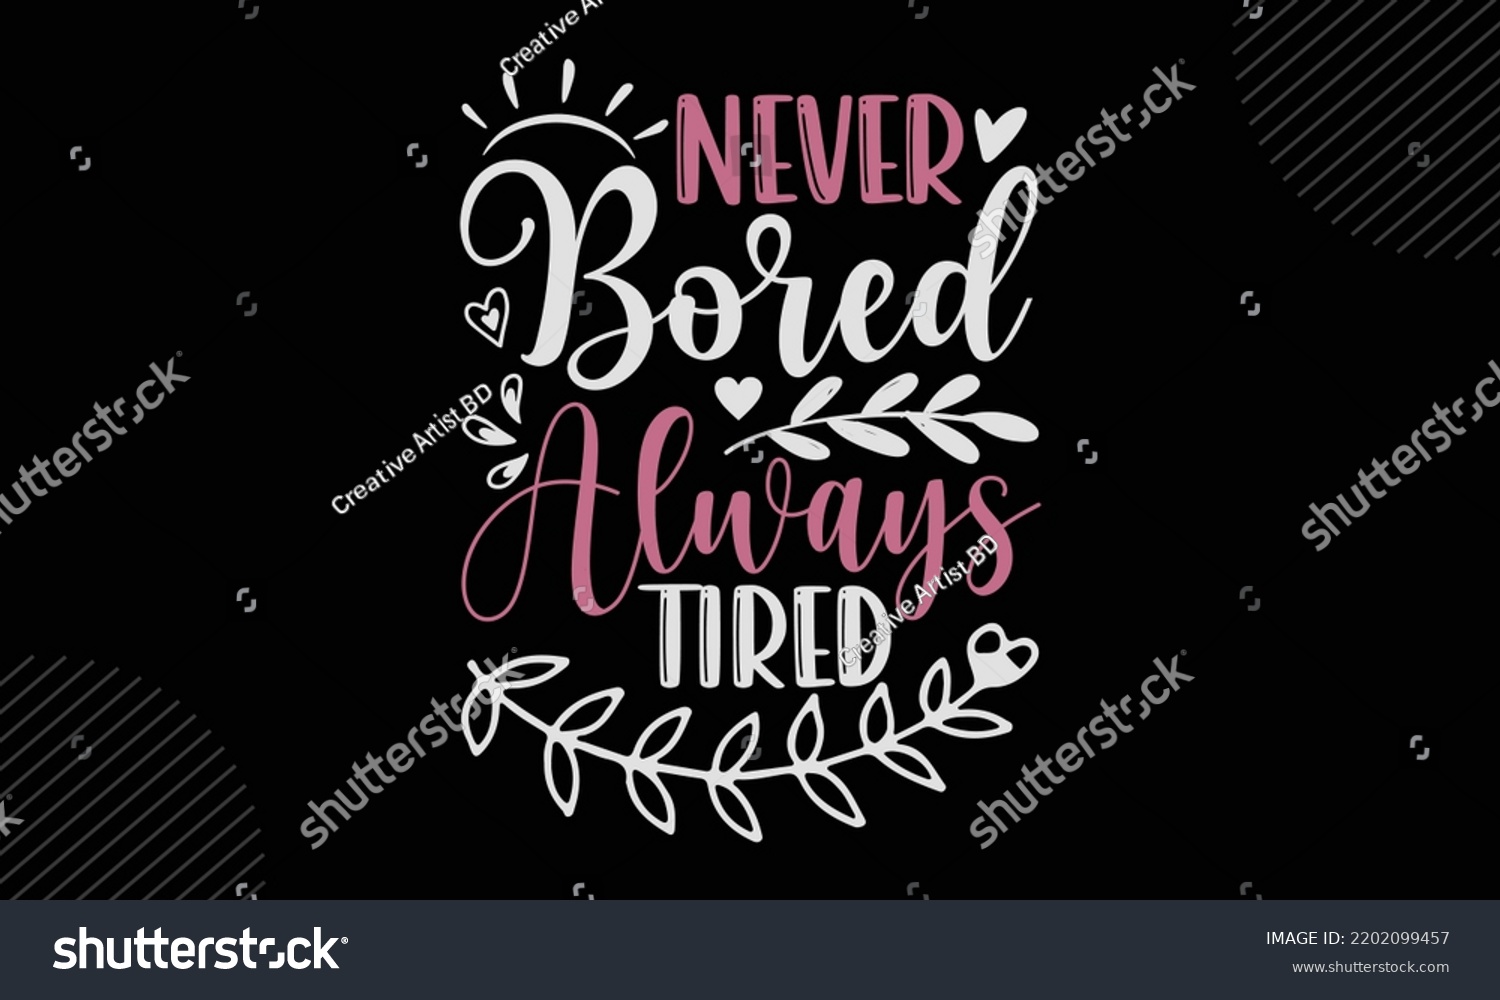 SVG of Never Bored Always Tired  - Mom T shirt Design, Hand drawn vintage illustration with hand-lettering and decoration elements, Cut Files for Cricut Svg, Digital Download svg